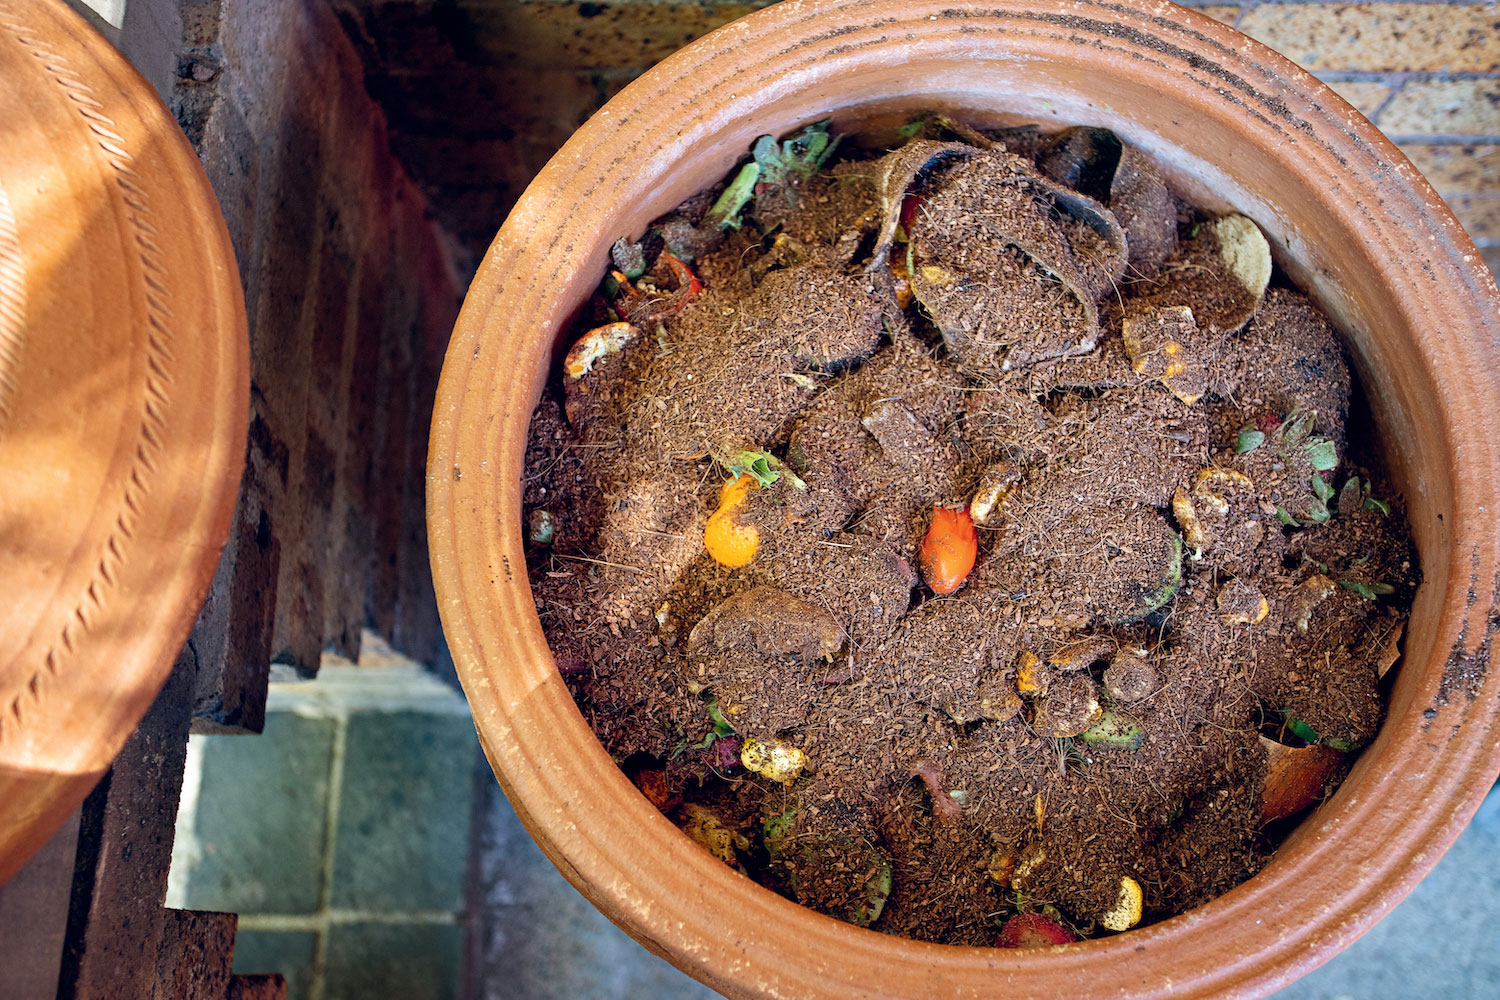 Composting at Home with Terra-Cotta Pots – A D.I.Y. Guide